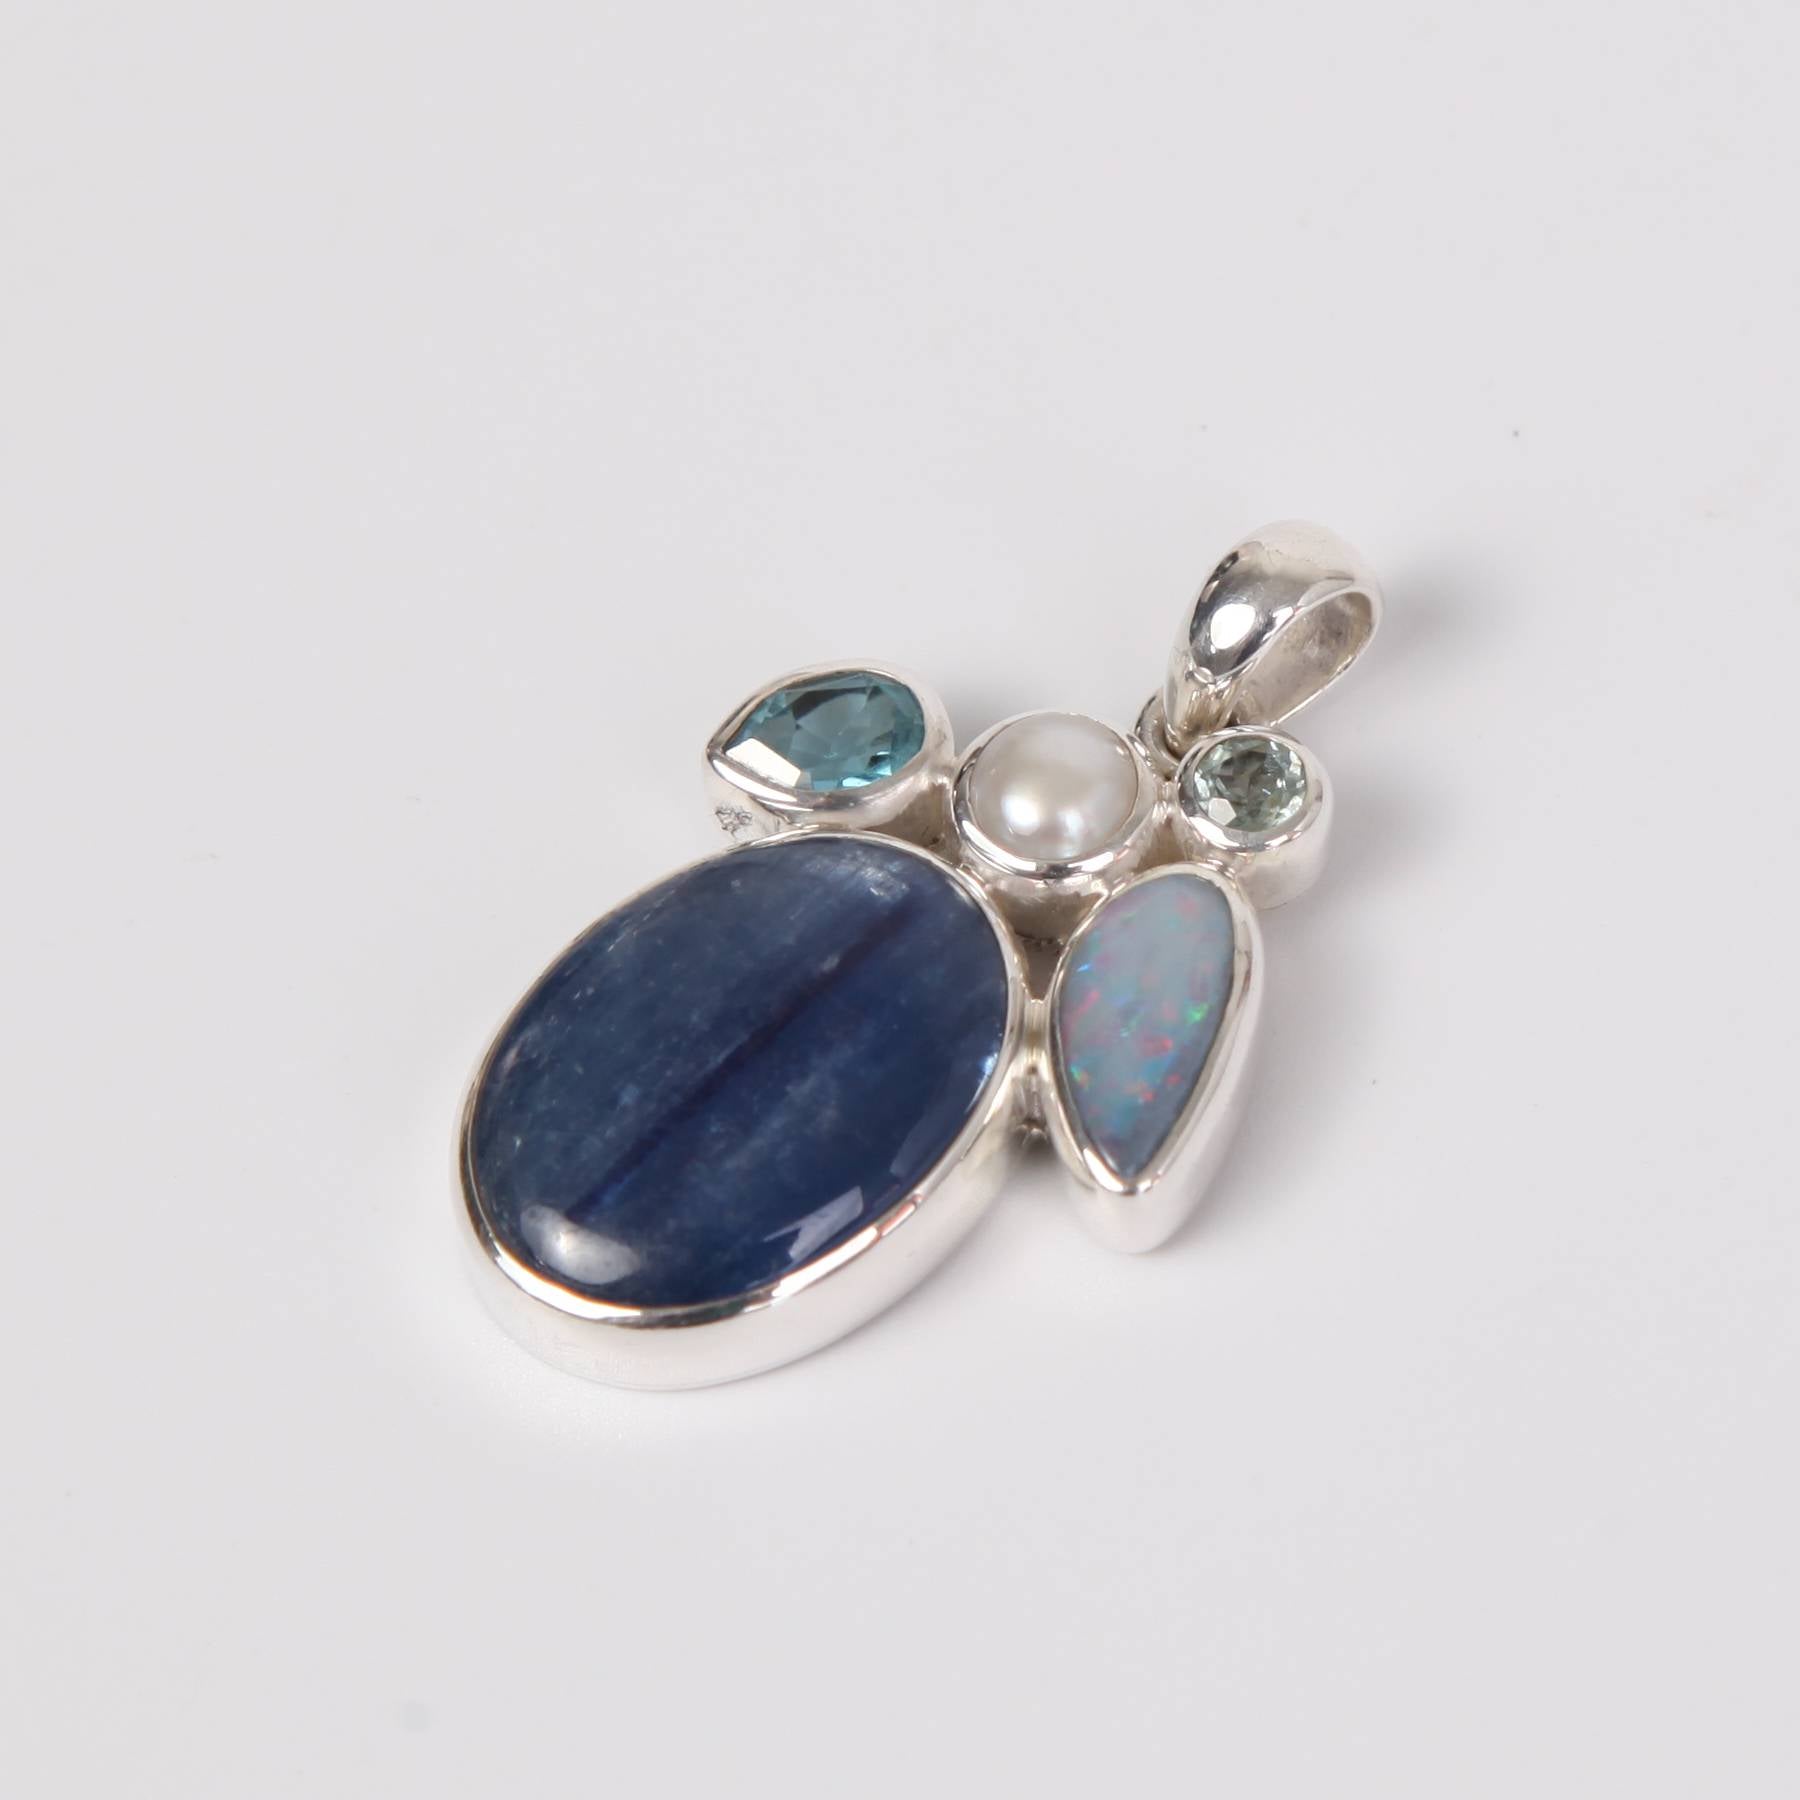 Kyanite Sterling Silver Pendant with Australian Opal, Aquamarine, Blue Topaz and Fresh Water Pearl